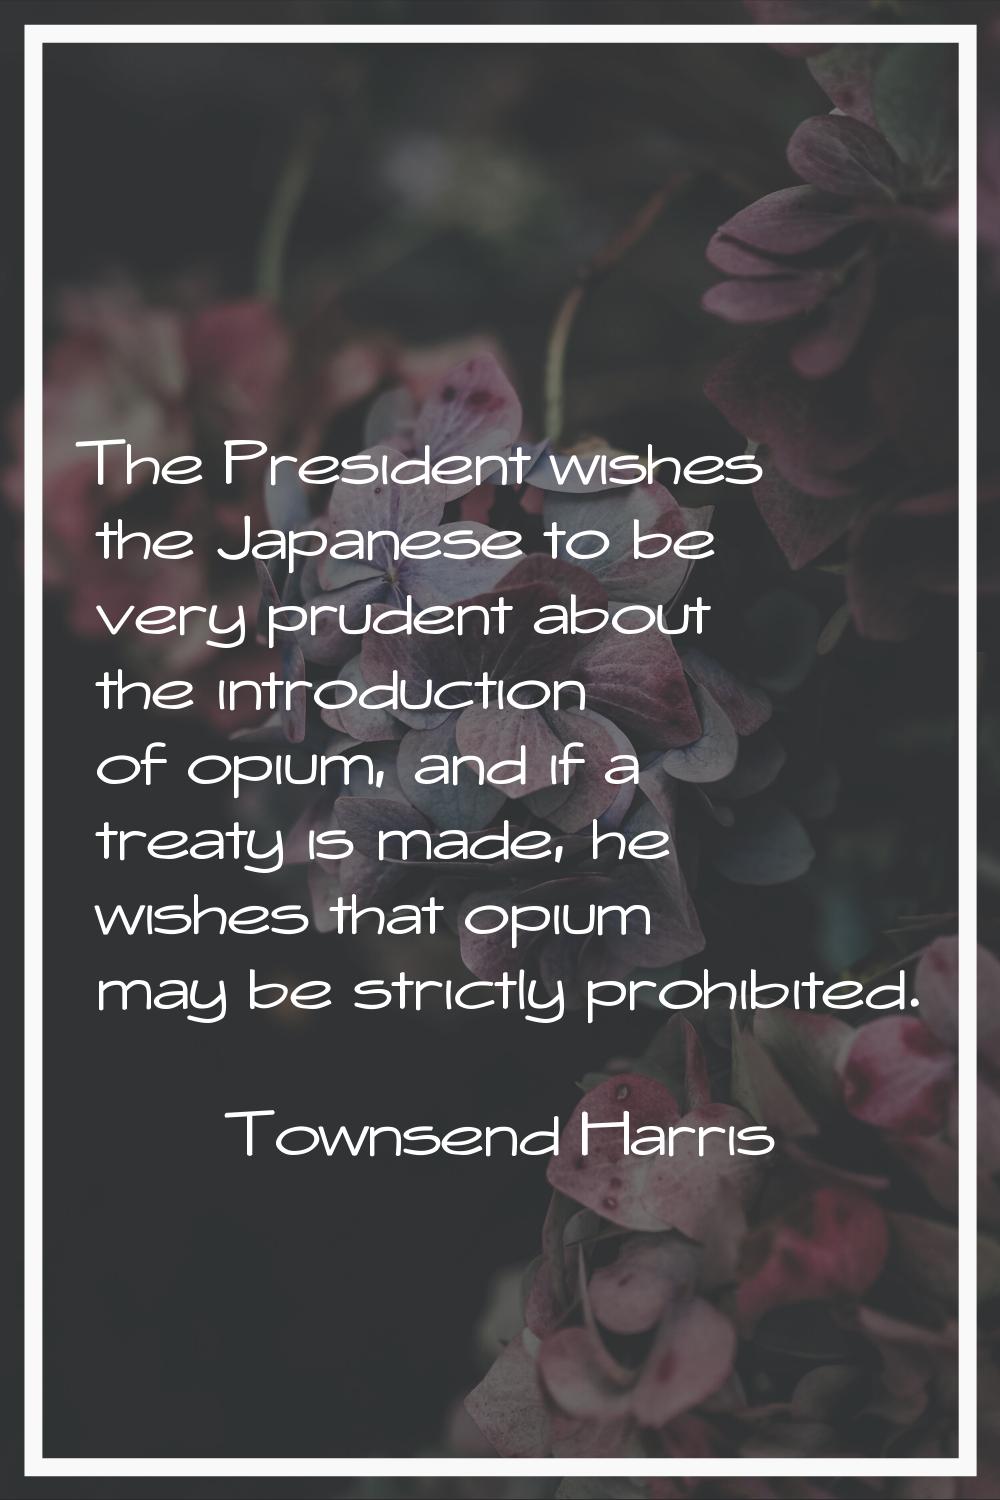 The President wishes the Japanese to be very prudent about the introduction of opium, and if a trea